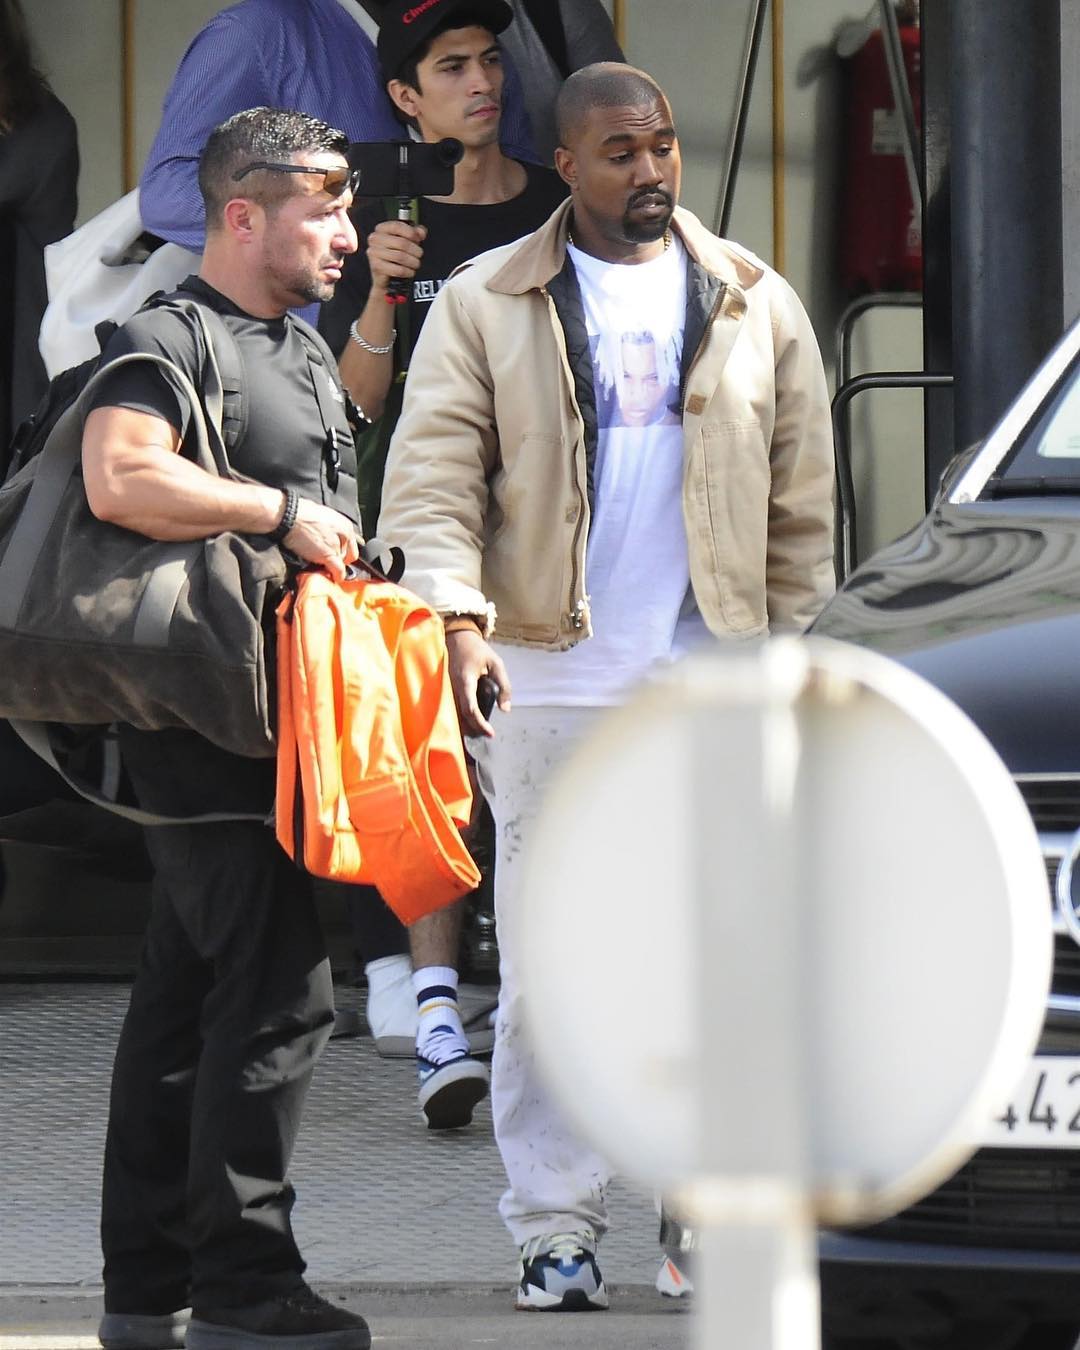 SPOTTED: Kanye West Rocks XXXTentacion T-shirt in Spain – PAUSE